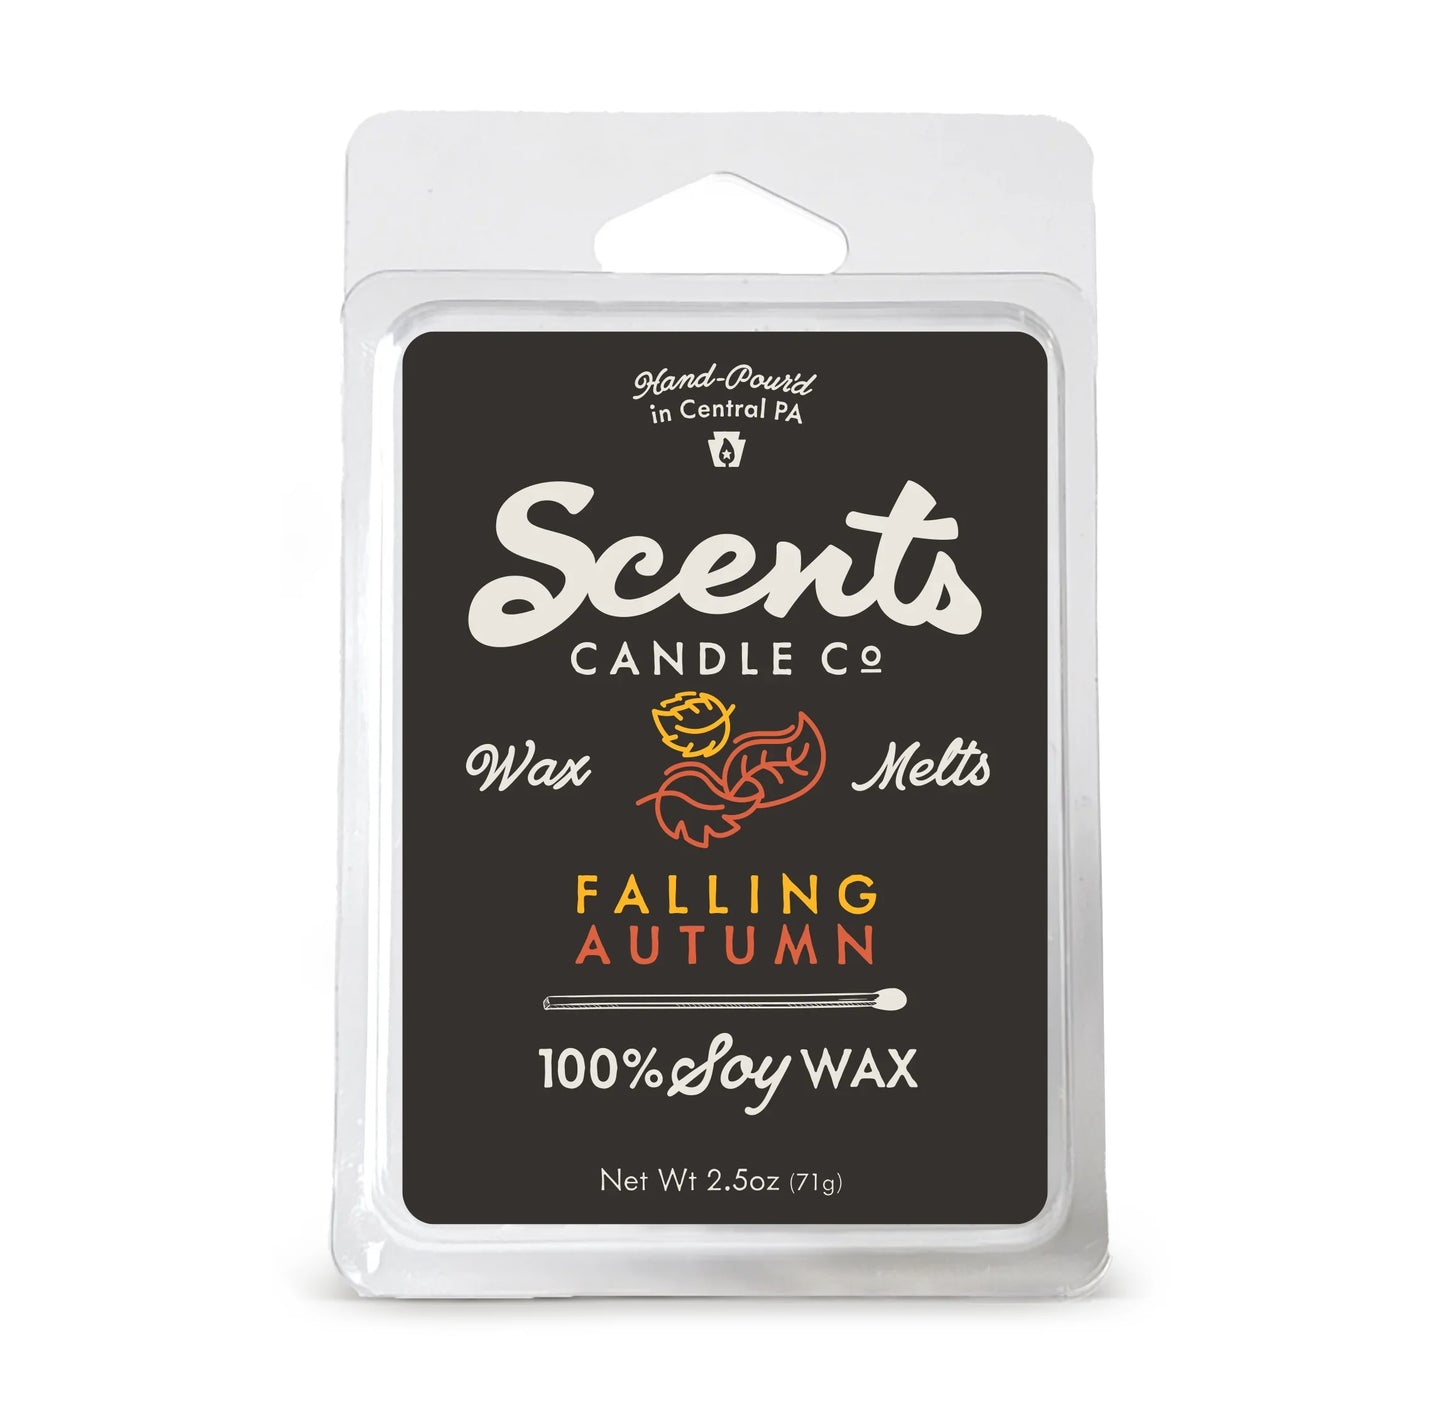 Scents Candle Co. Falling Autumn Wax Melt